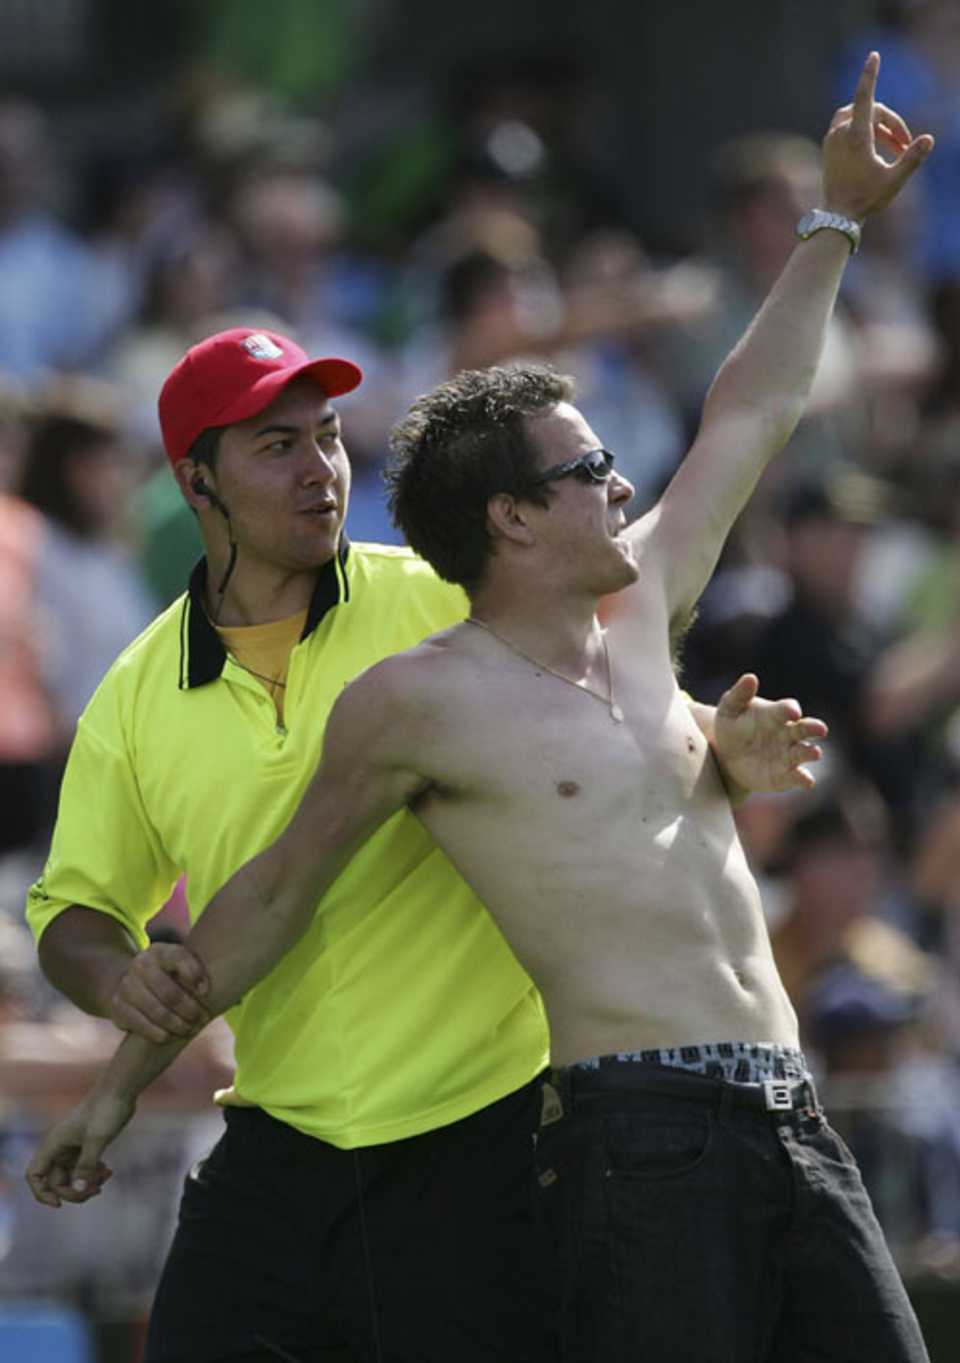 Aren't we a clever boy? A spectator is ejected after giving others the benefits of  seeing his torso